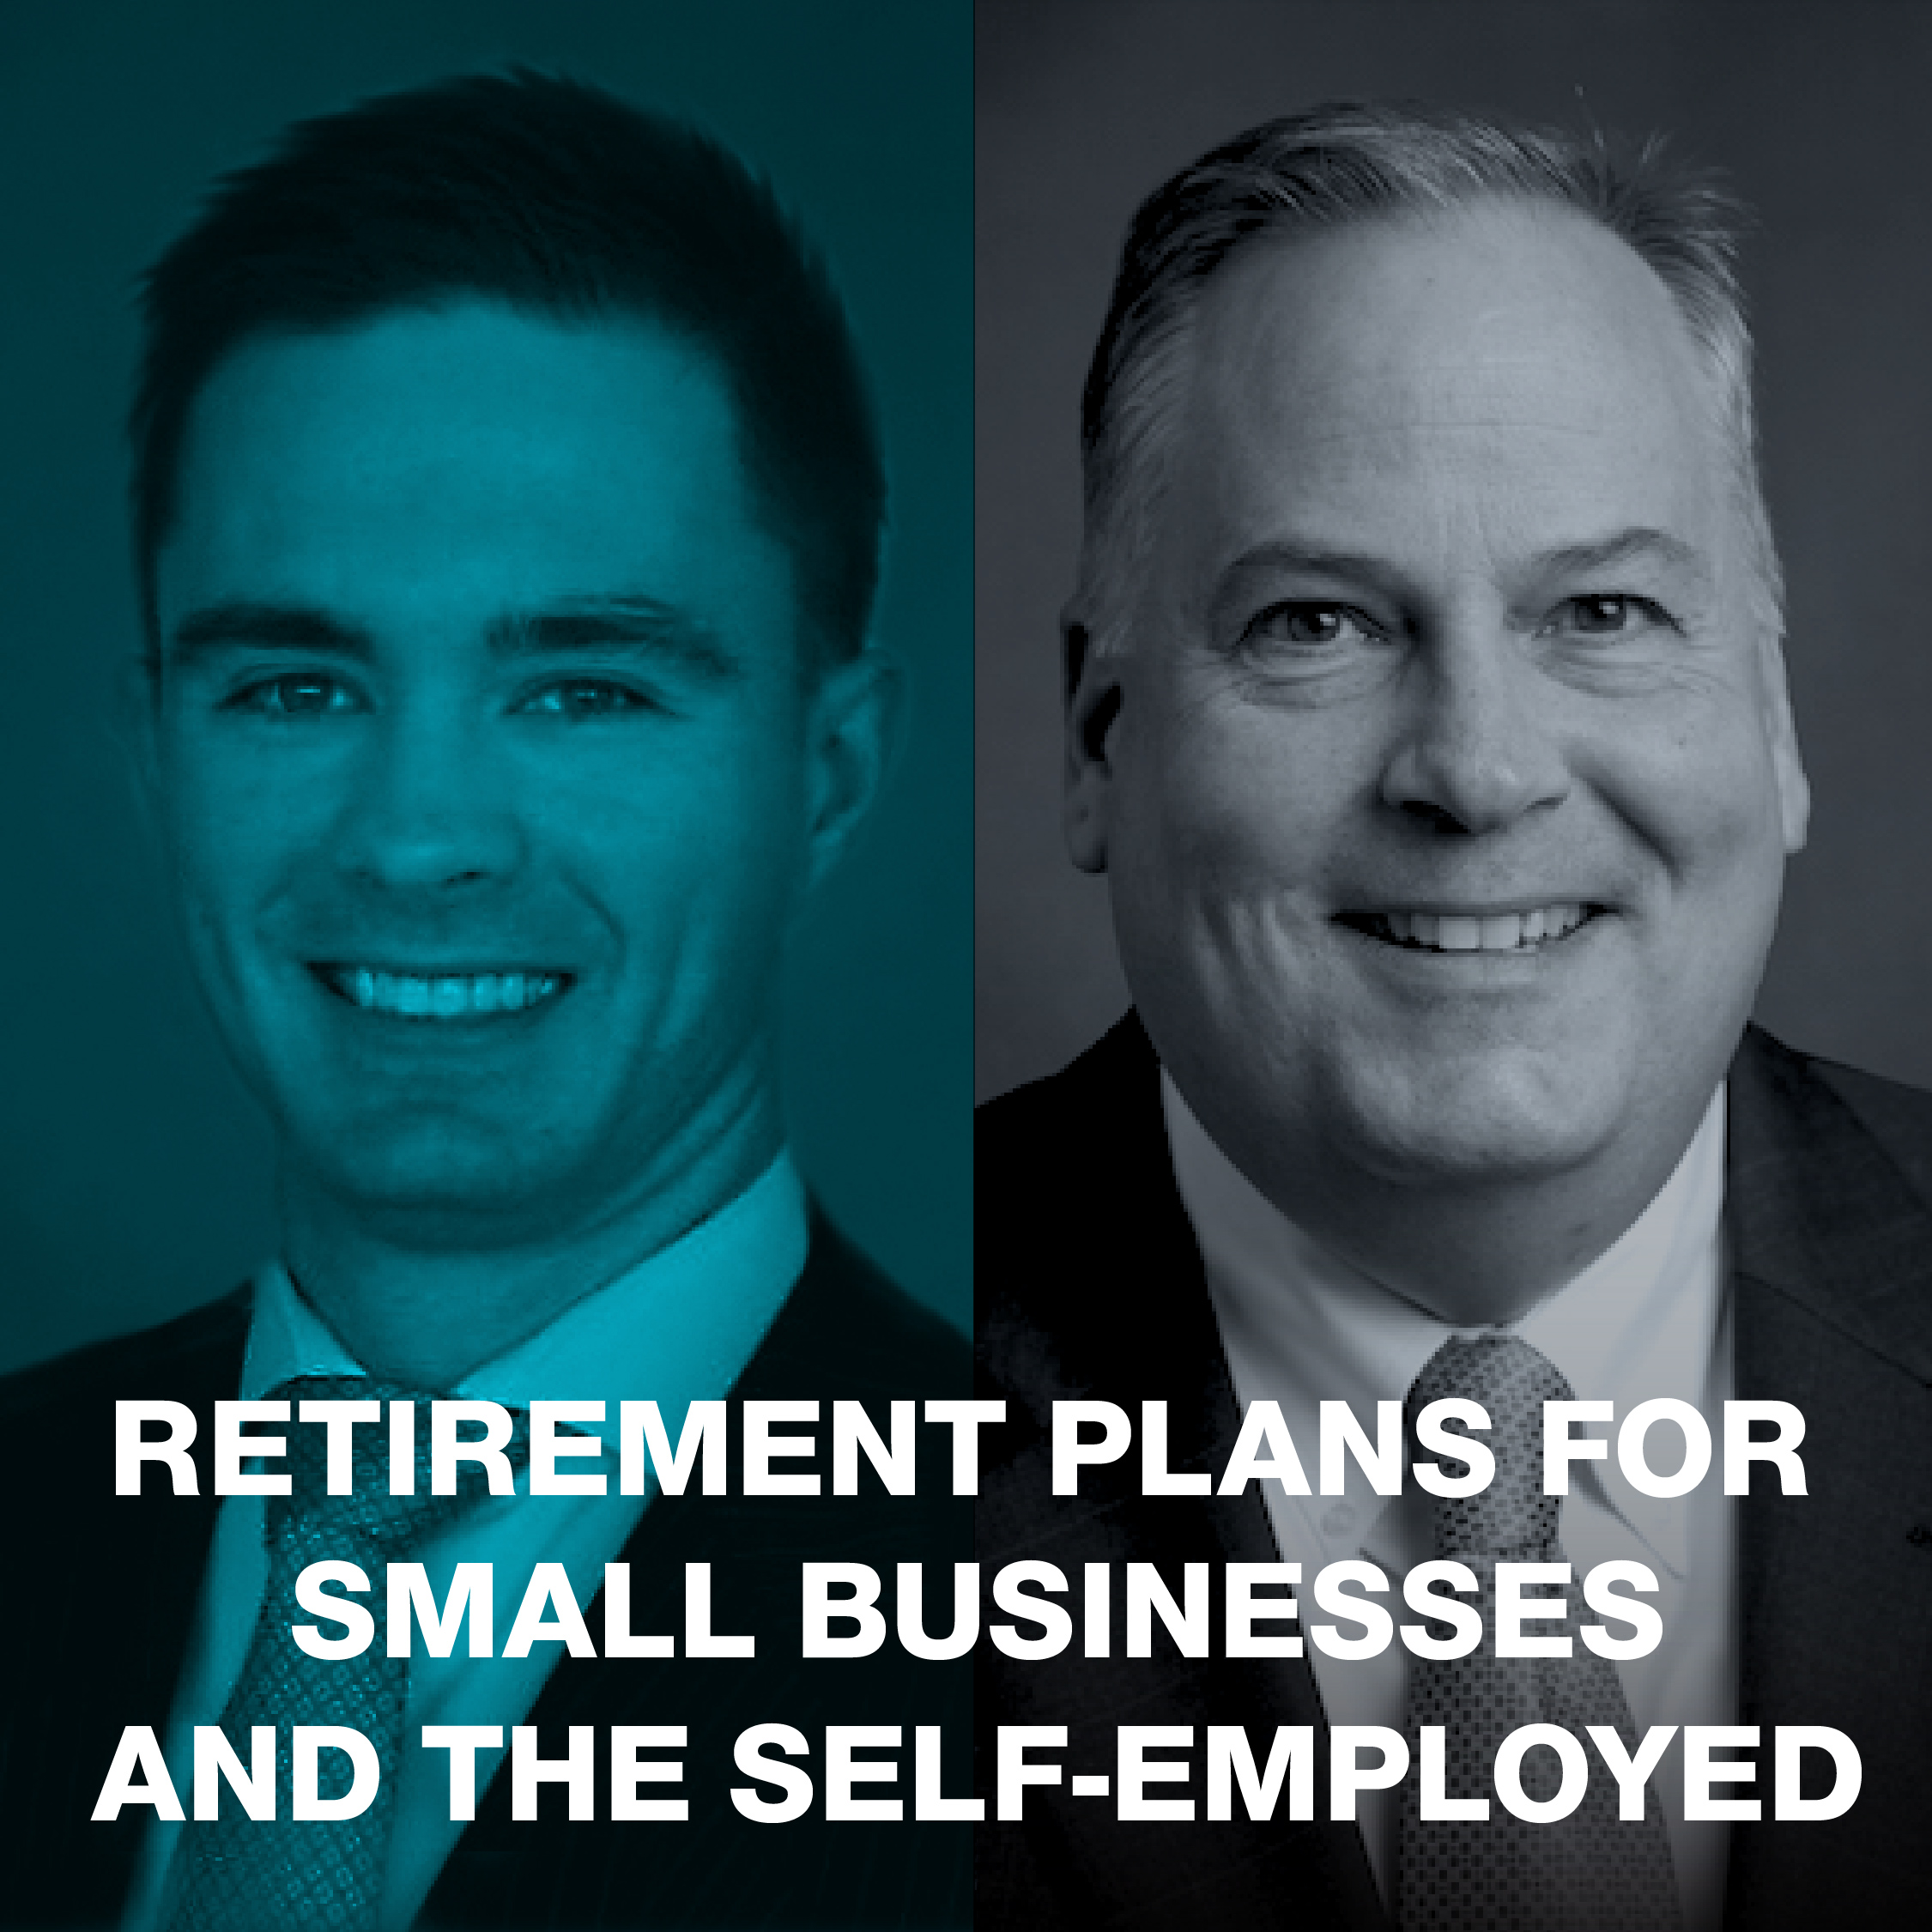 Retirement plans for small businesses and the self-employed